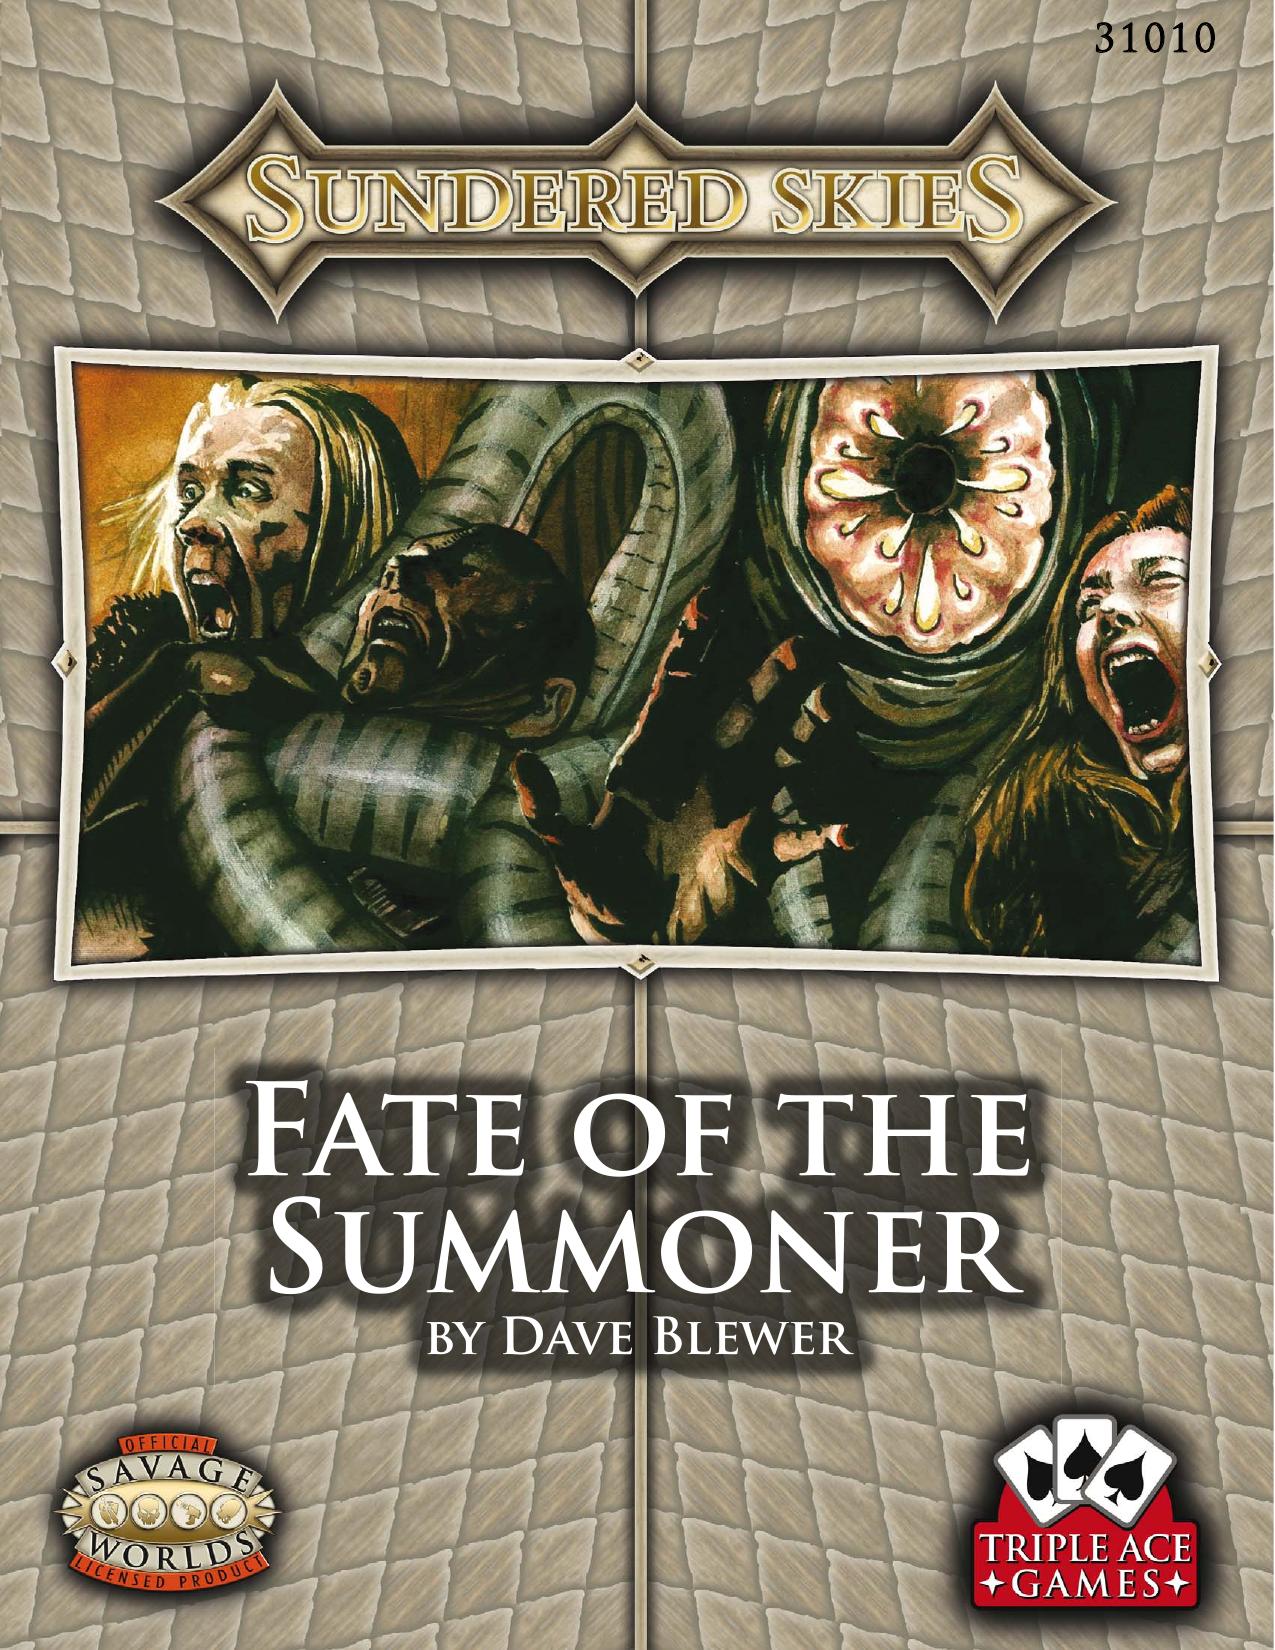 TAG31010_Fate_of_the_summoner_cover.indd